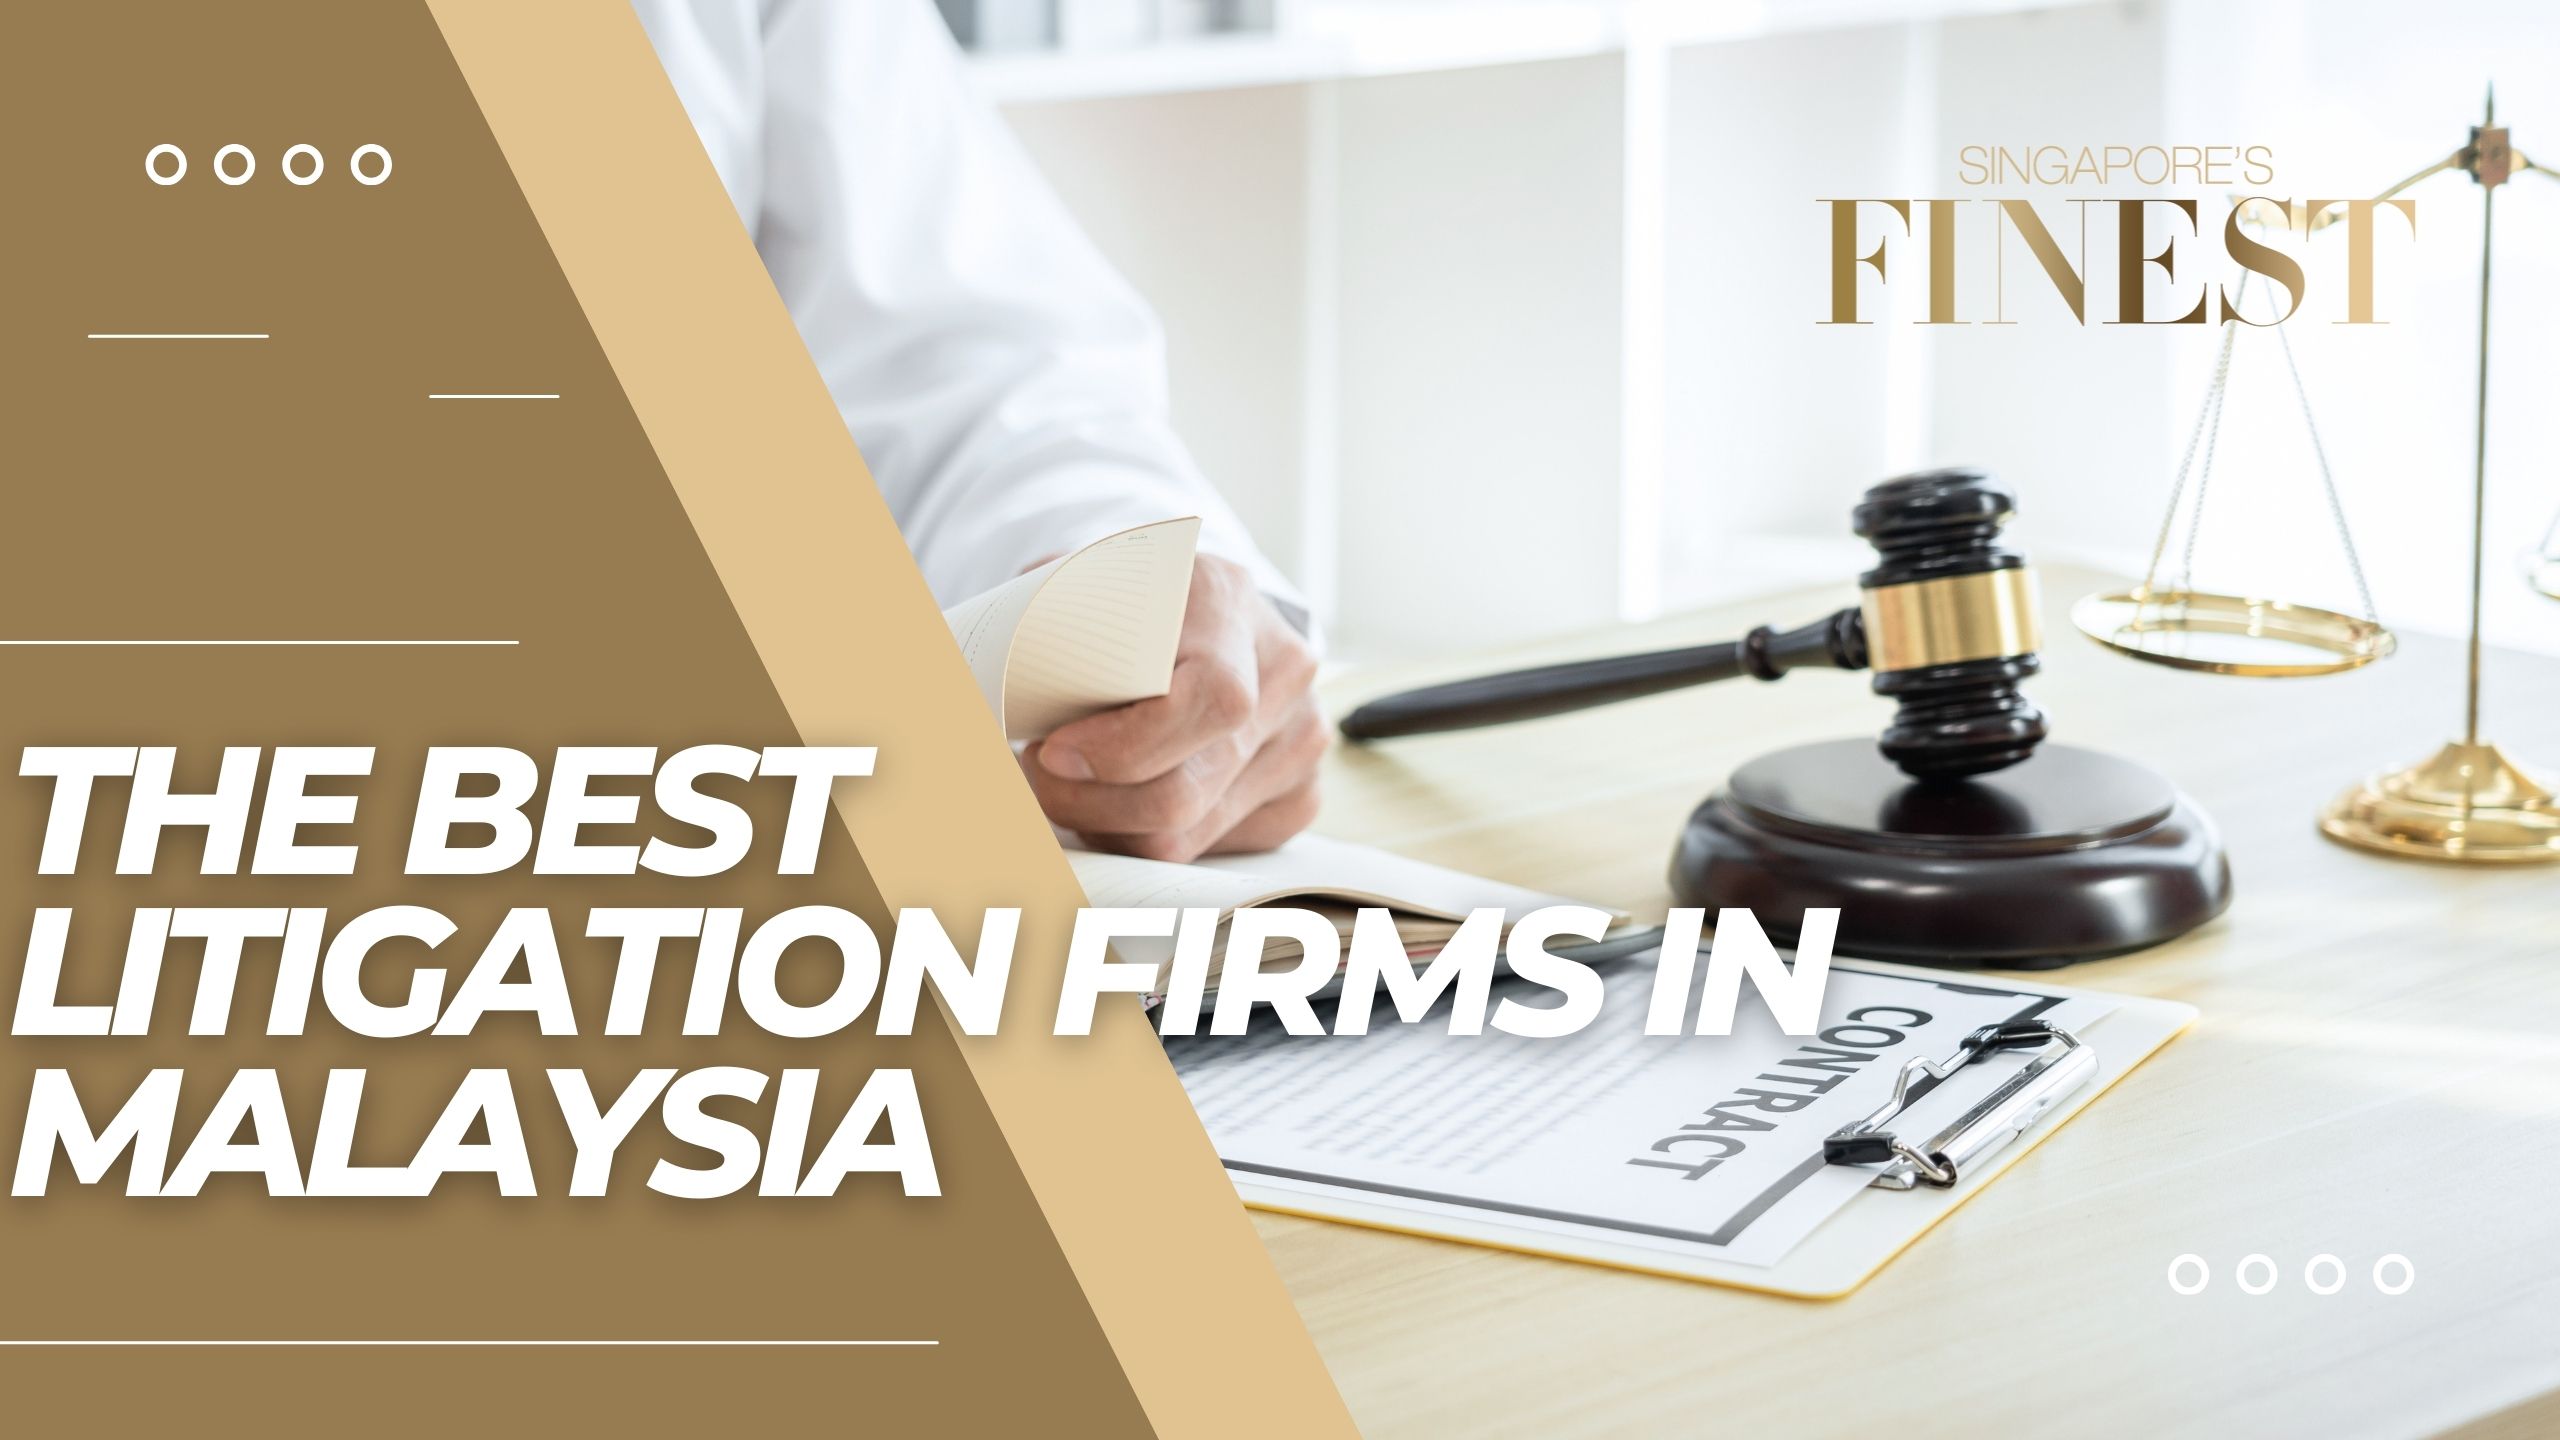 The Finest Litigation Firms in Malaysia